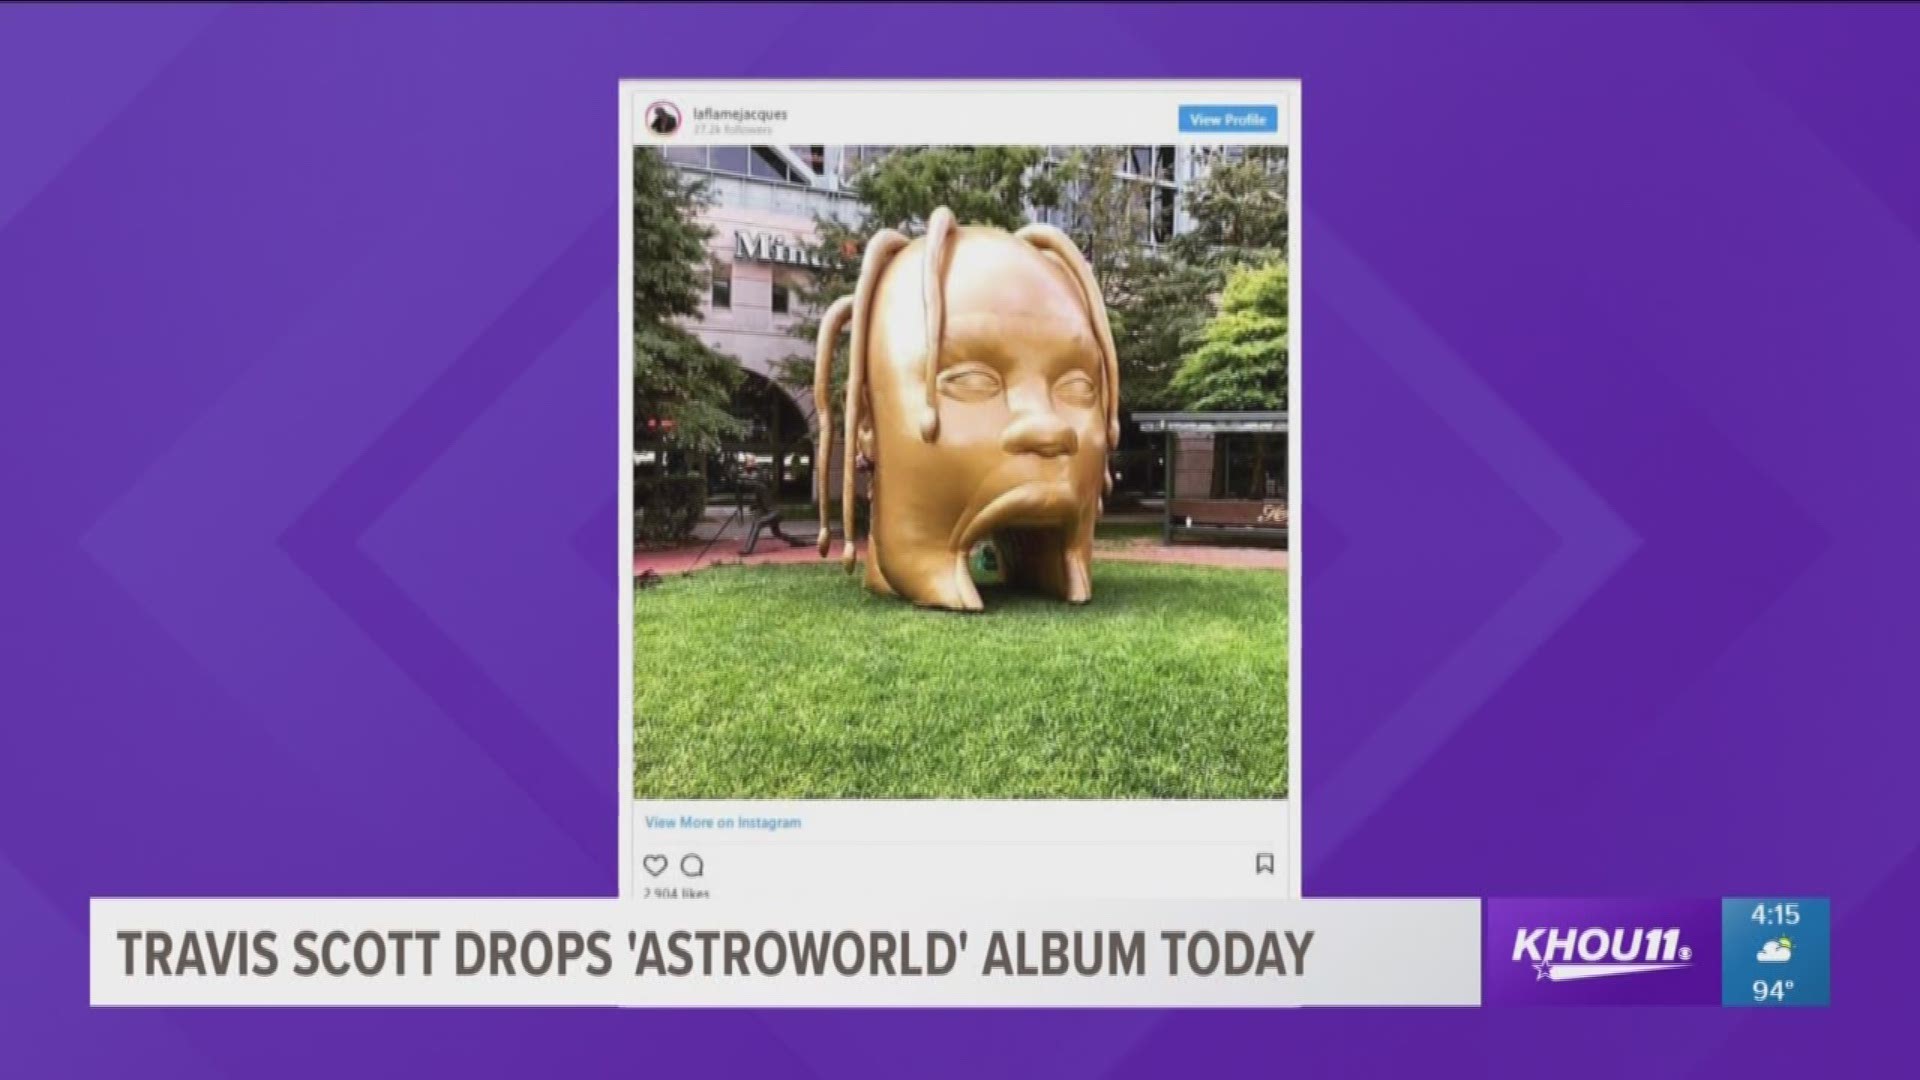 Travis Scott, rapper and Missouri City native, released his new album "Astroworld" Wednesday, and a huge, inflatable Travis Scott replica head was seen outside of Minute Maid Park to commemorate the release.